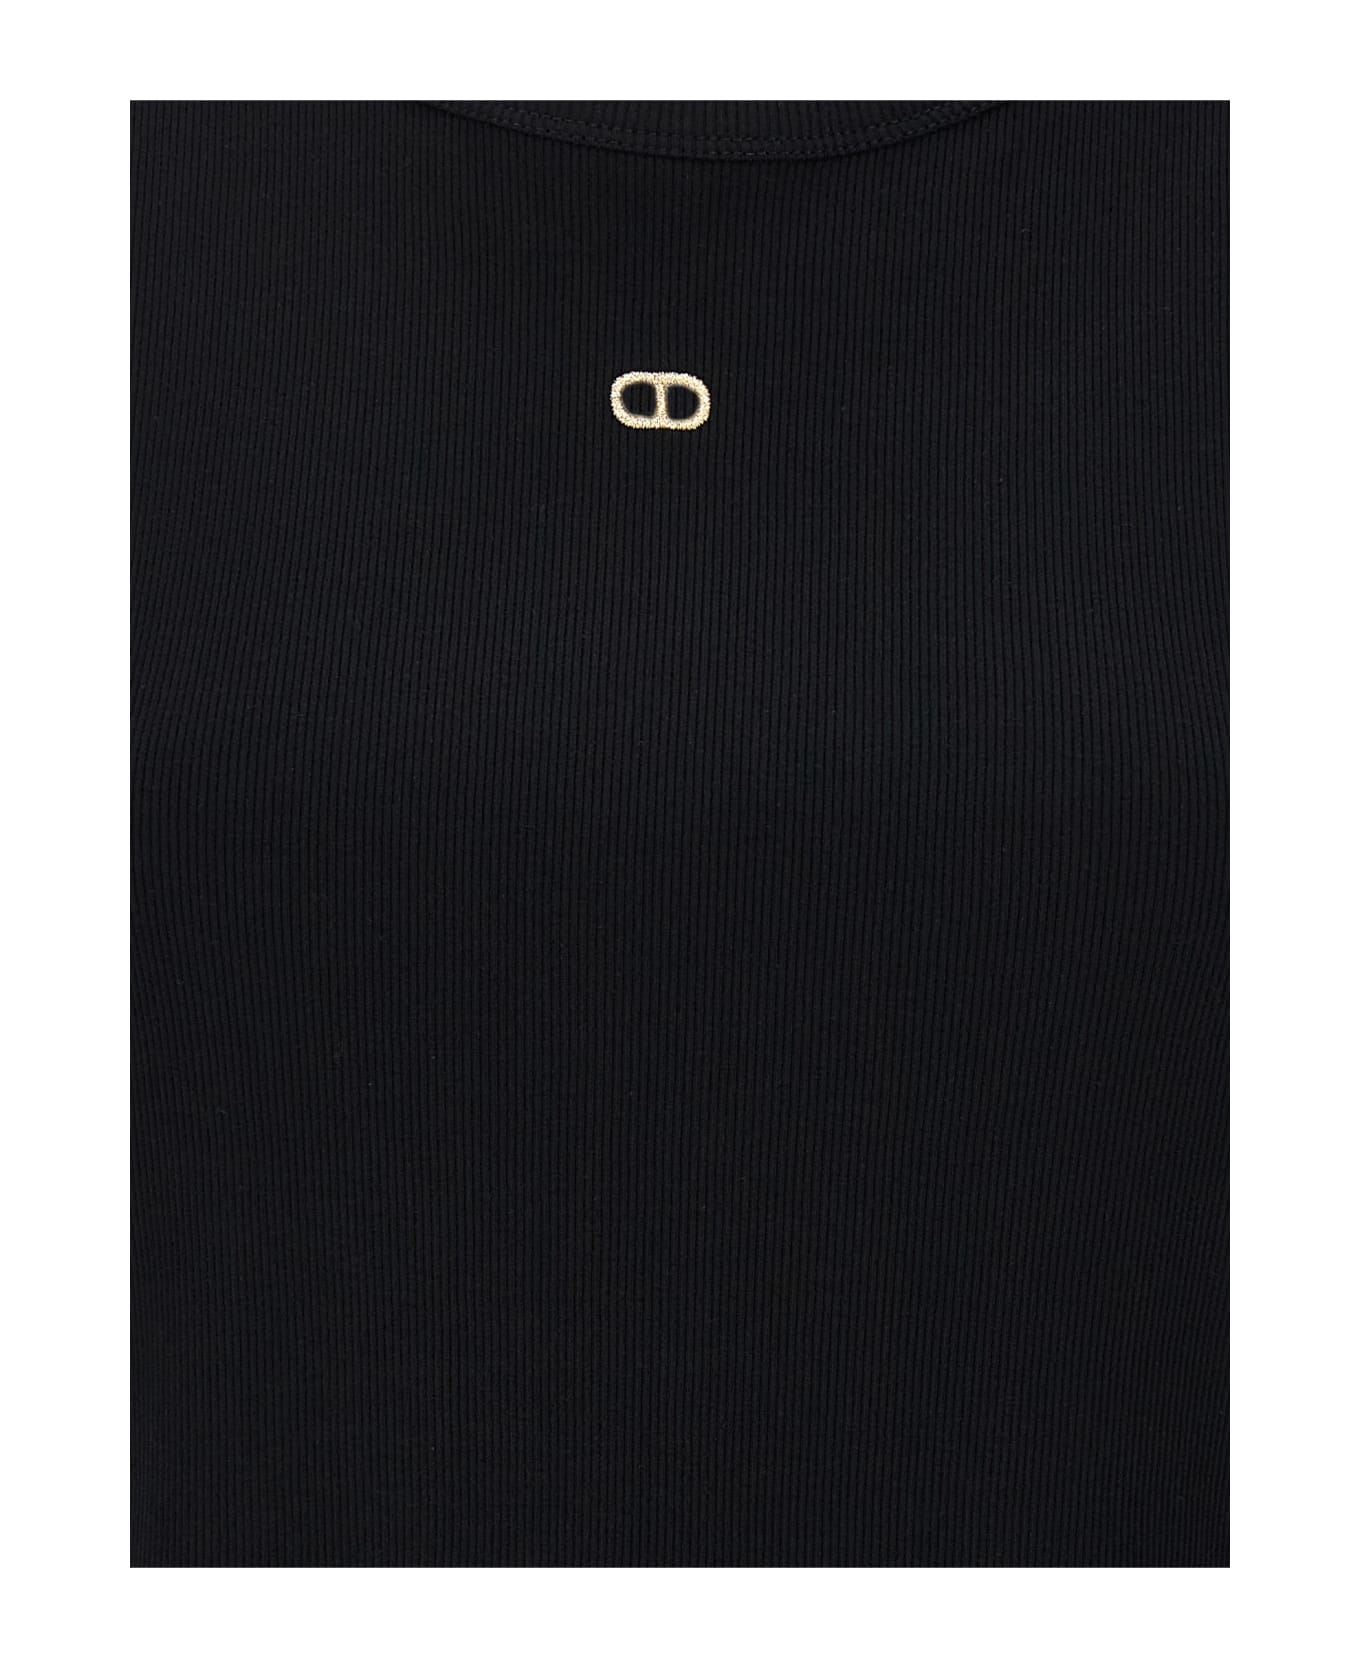 TwinSet Logo Embroidery Tank Top - Black  